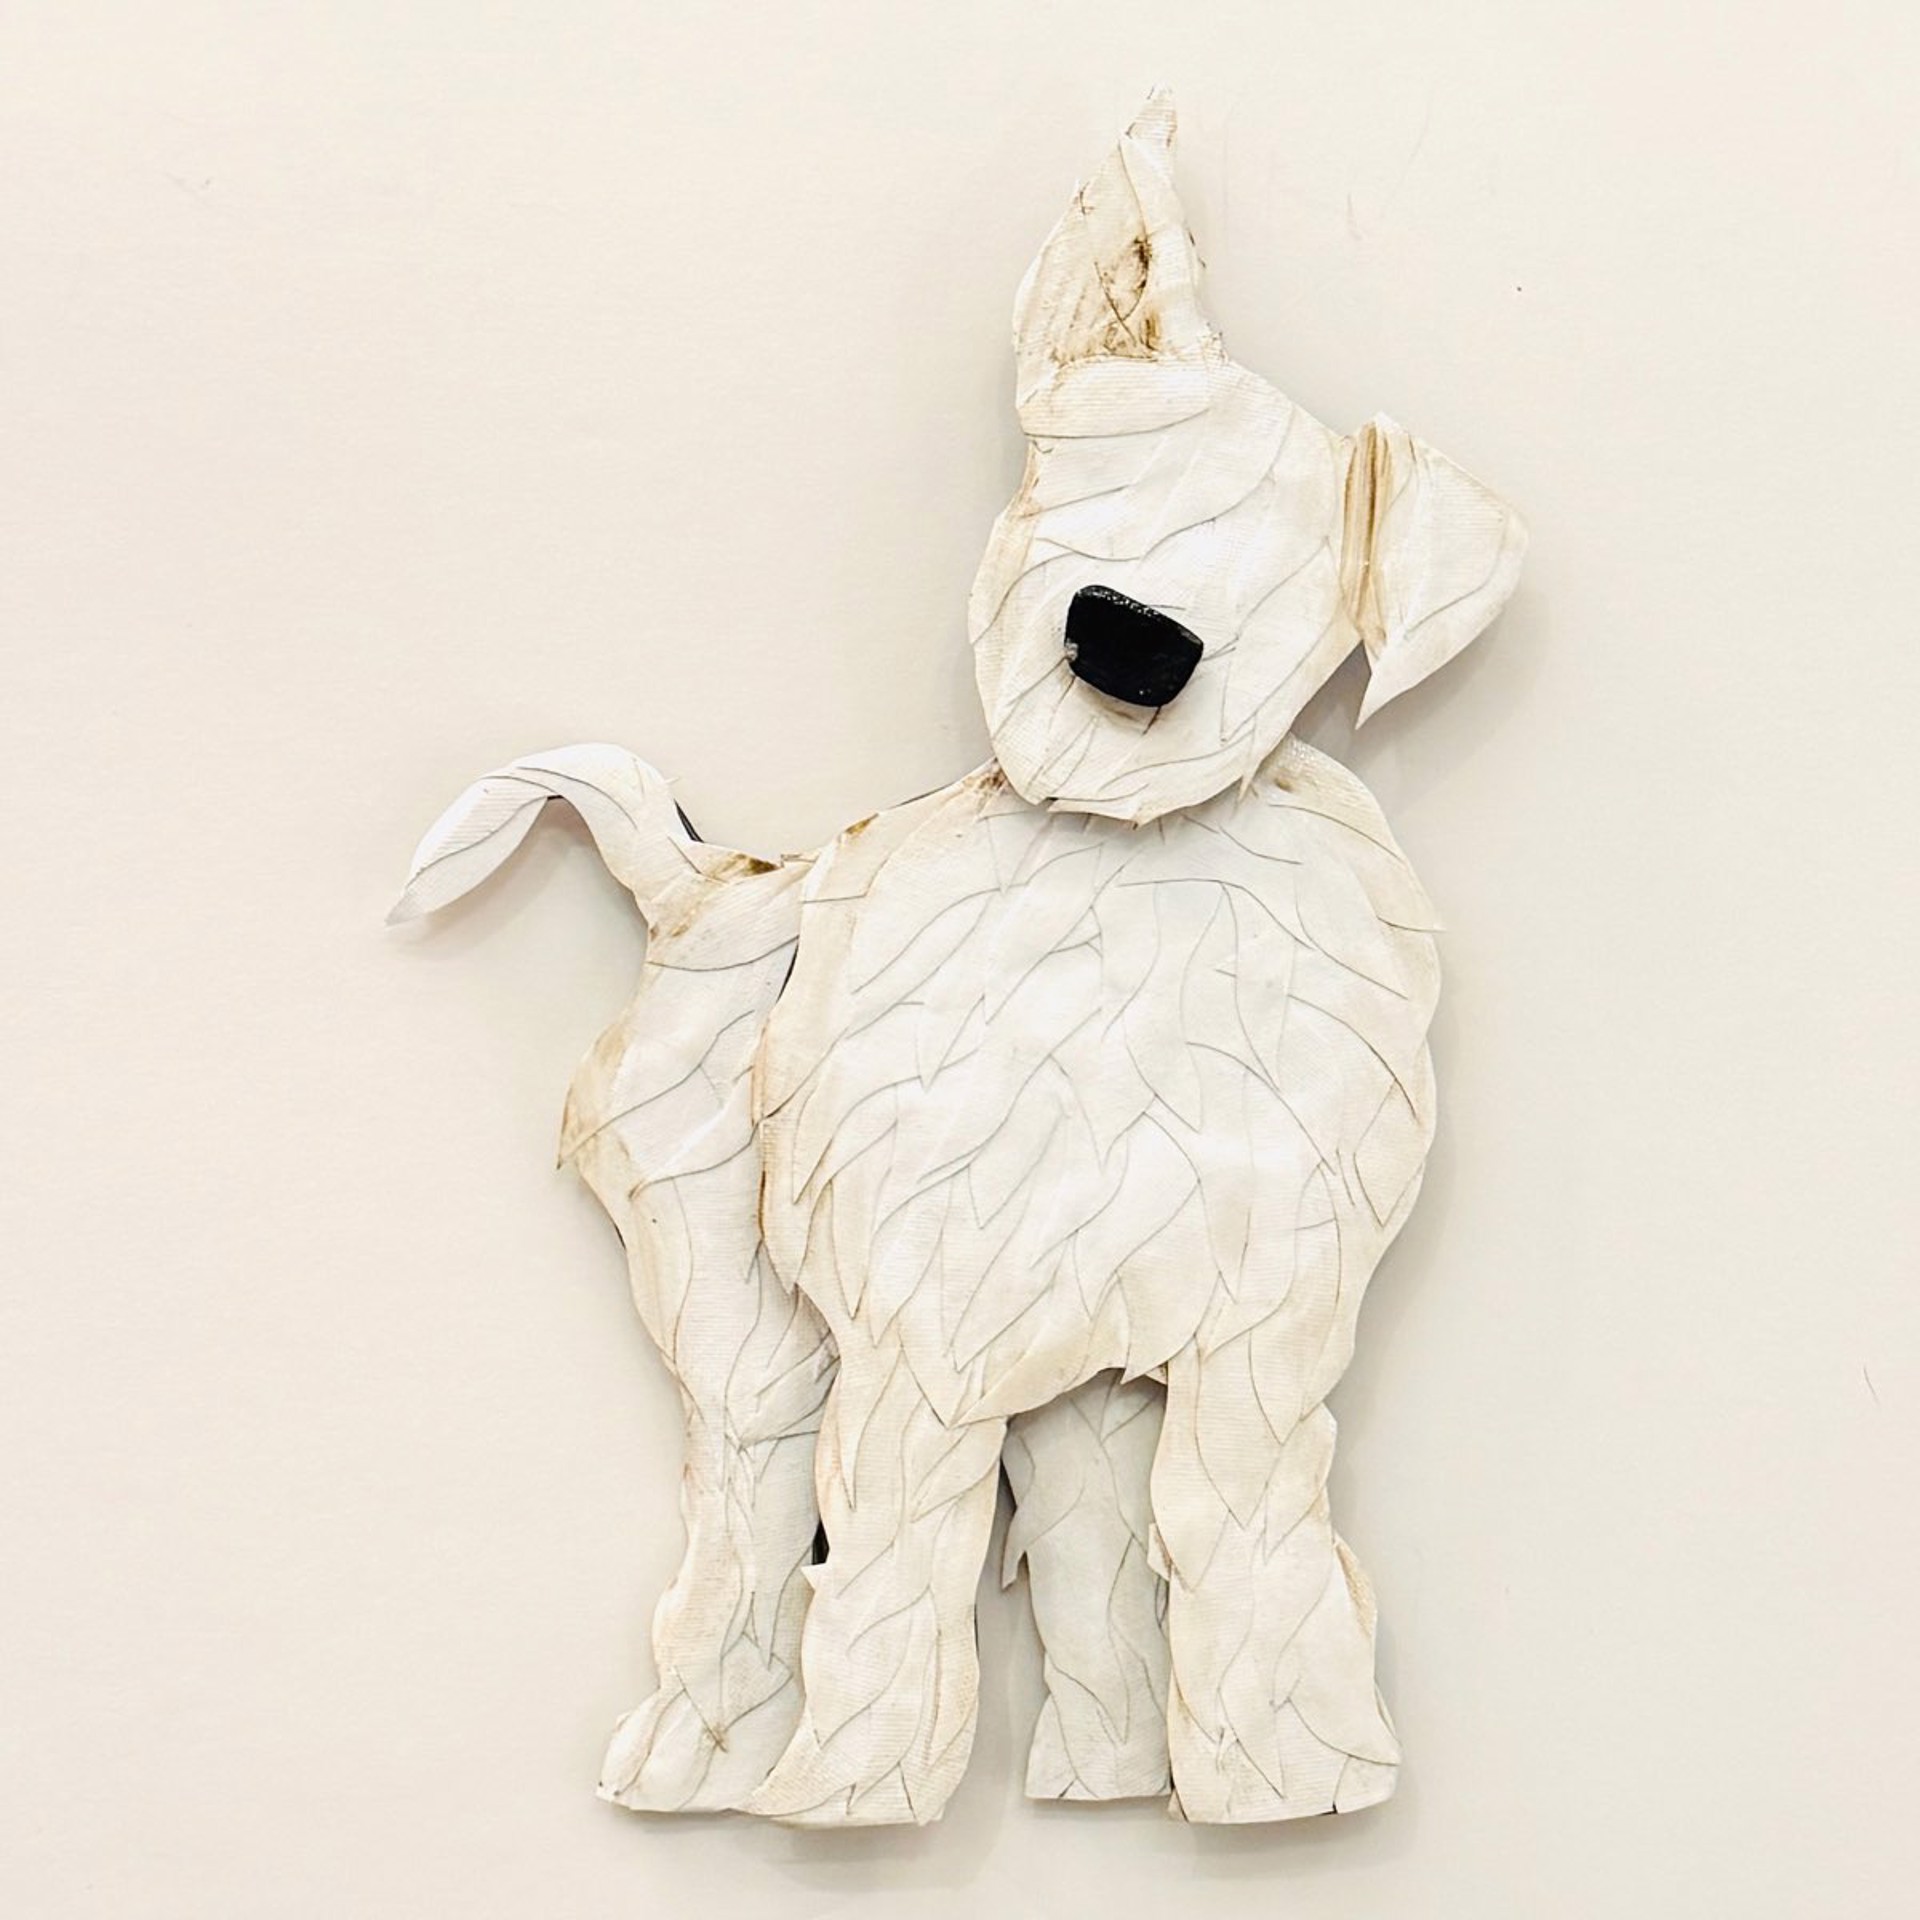 3D Curious White Pup Wall Sculpture RC23-04 by Robin Cooper